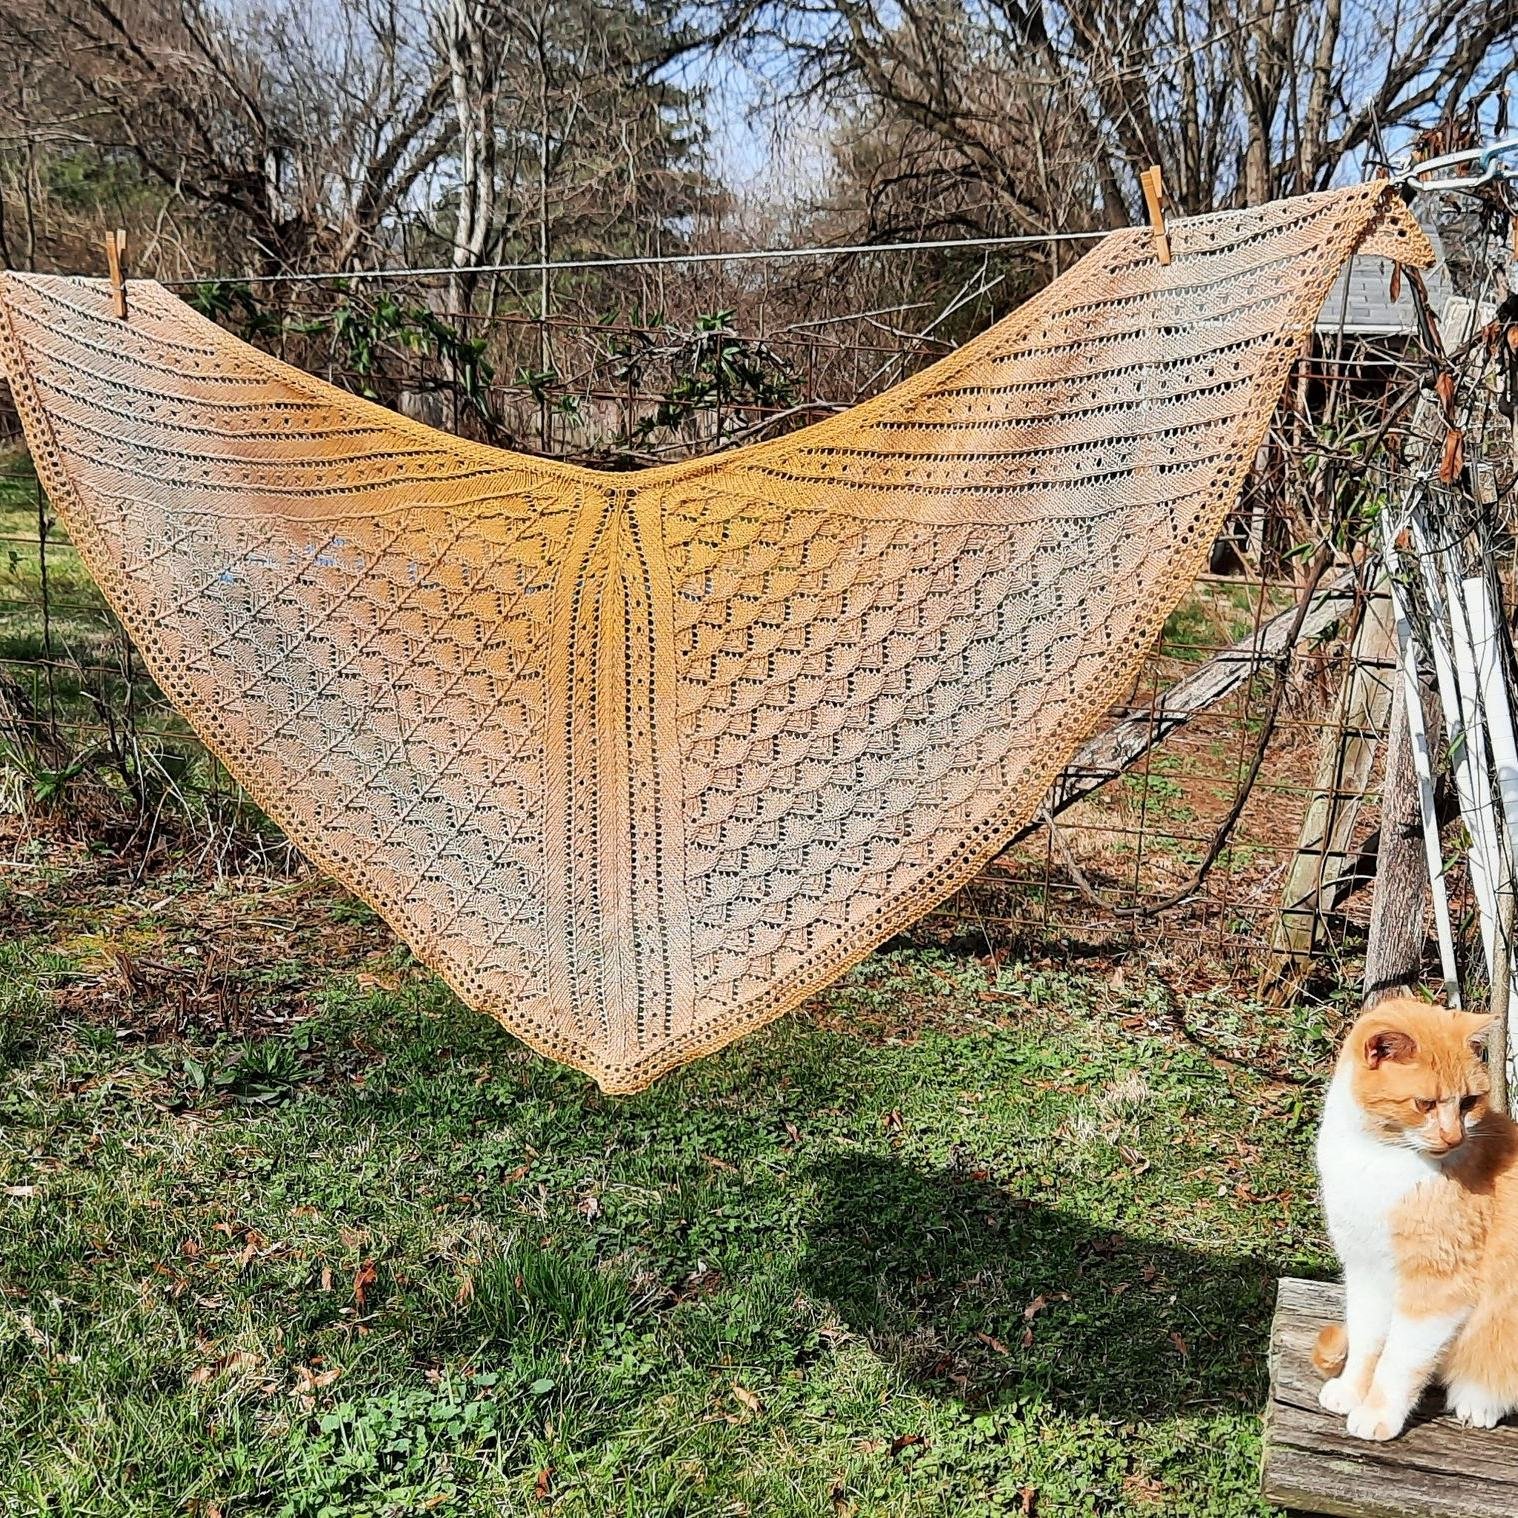 Aset Shawl (design by Tiziana Sammuri). 🌞Beautiful shawl in a very wearable shape. It is knitted in SAFFRON (2 x 100 gr). Thank you to Bitty for knitting this sample.  More color choices are online: wollesyarncreations.com  Order yours today. 🐱 The